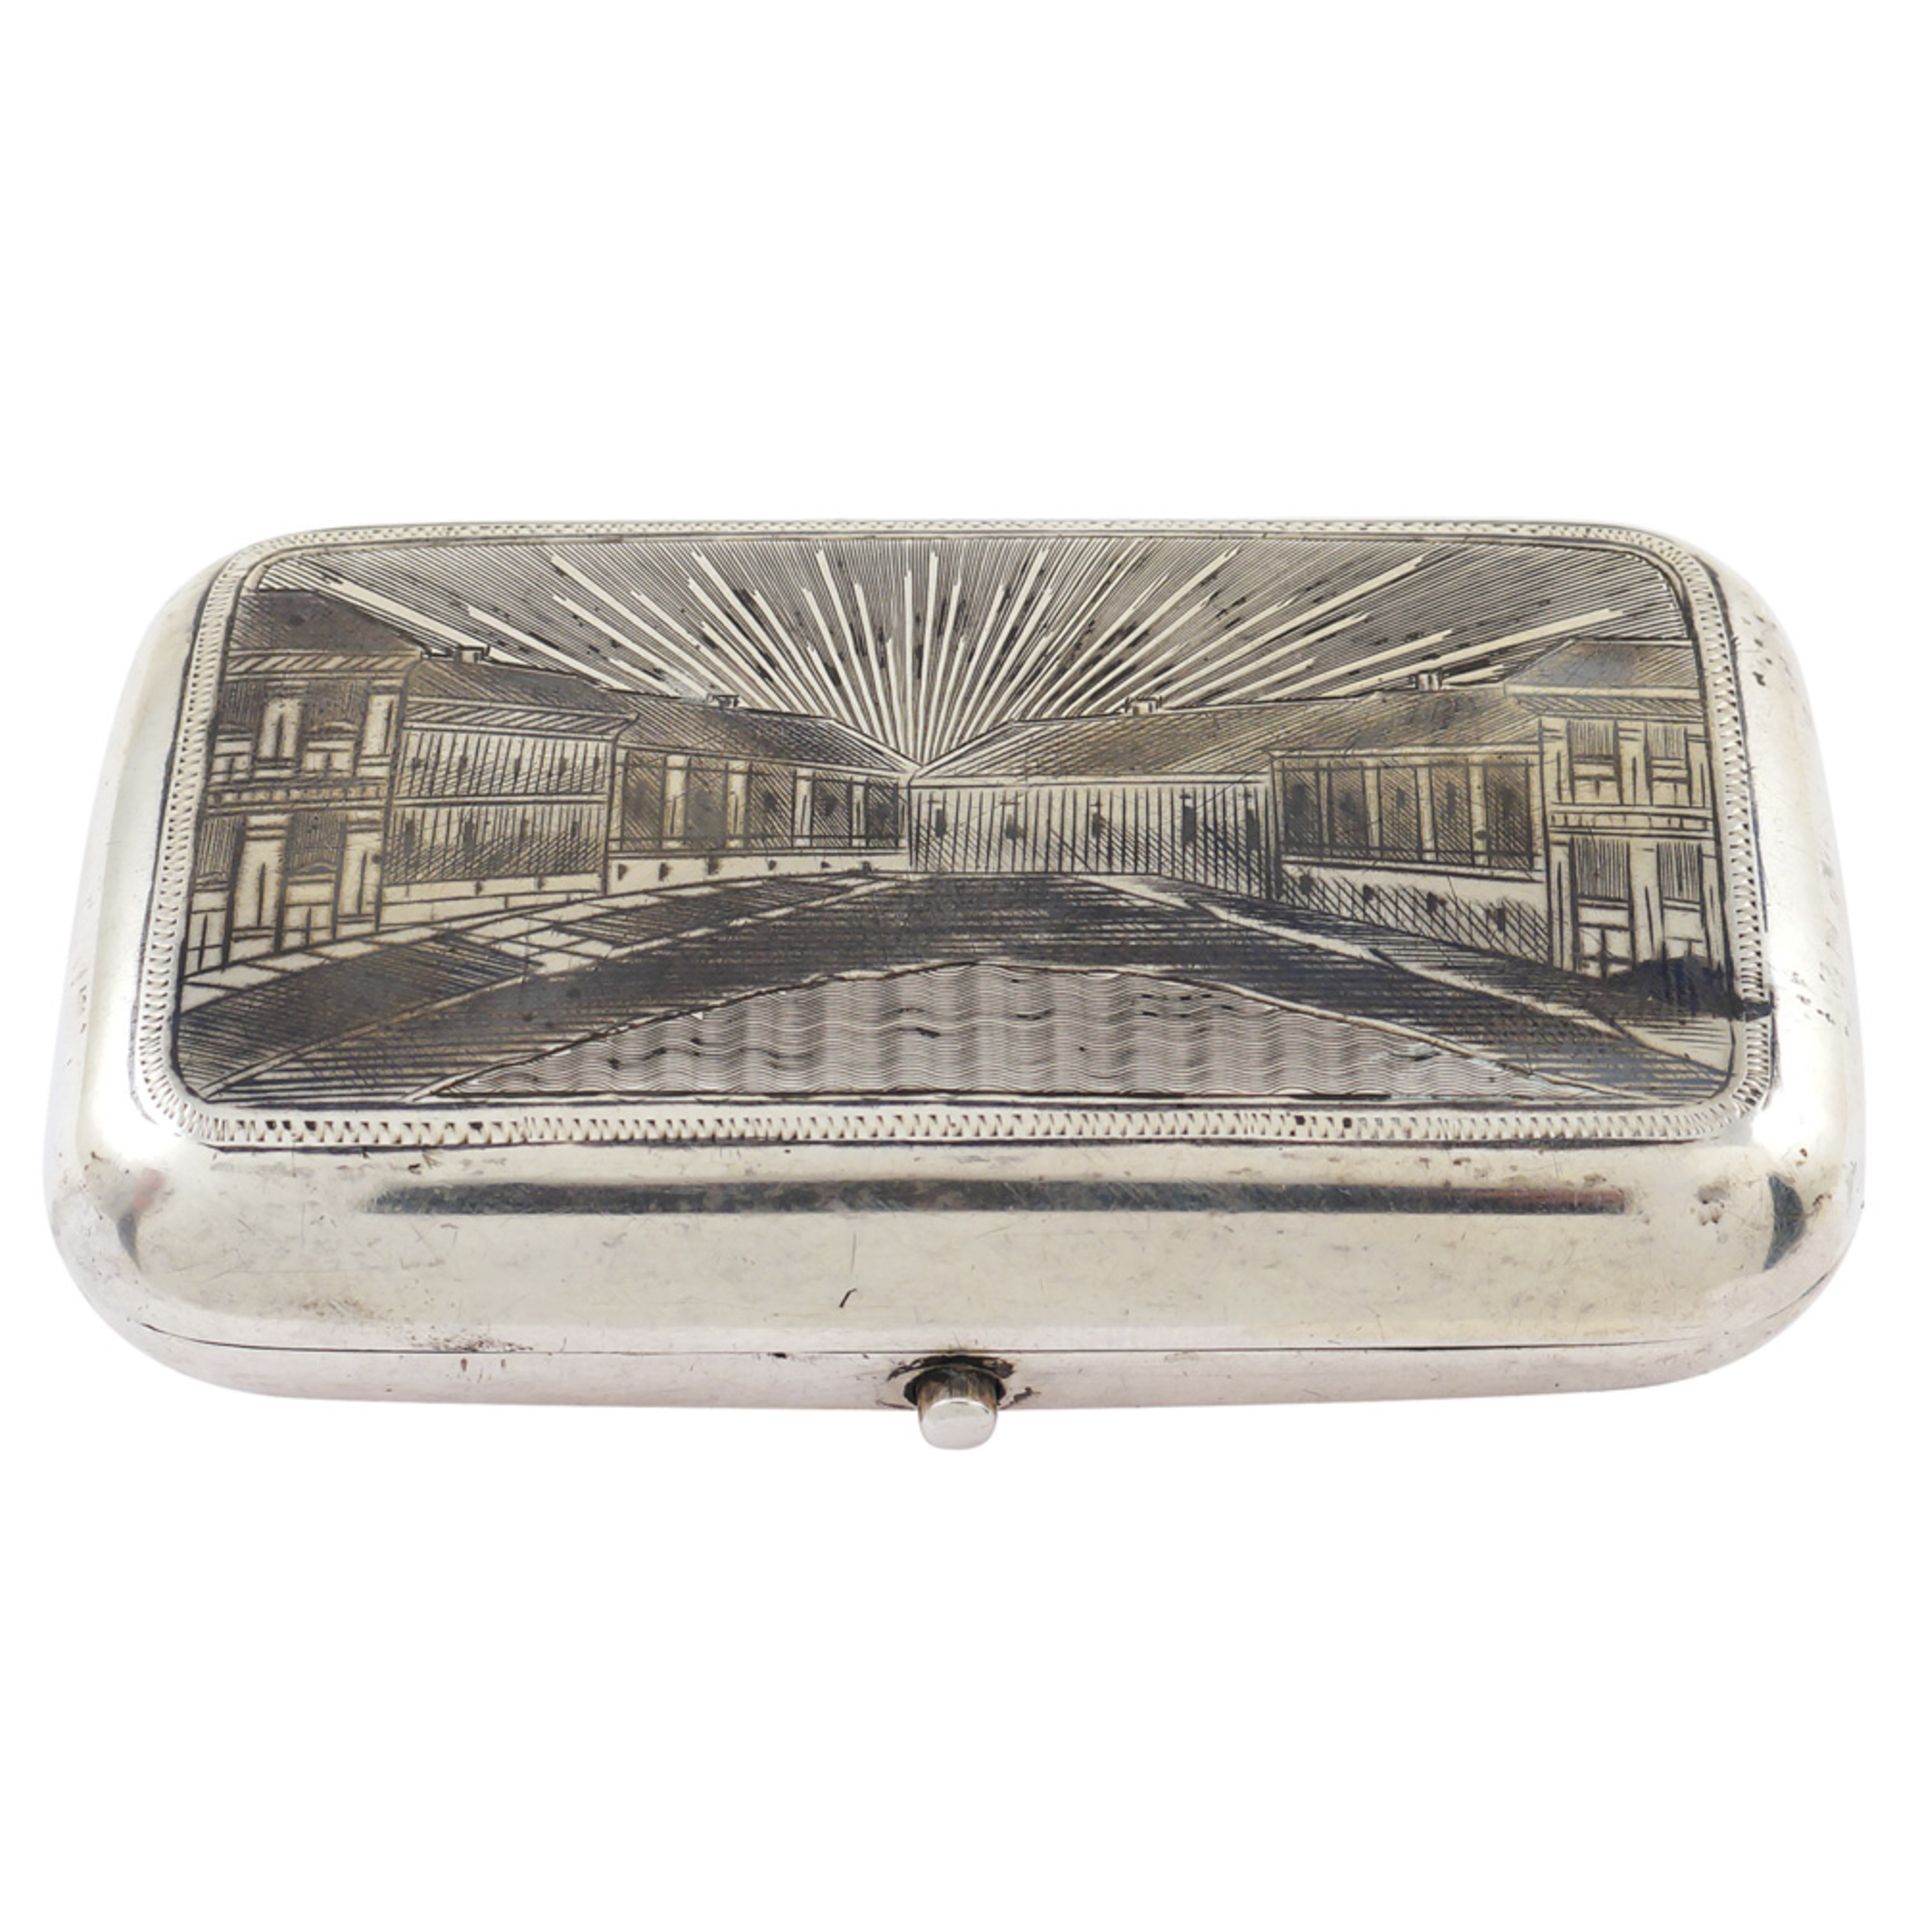 A silver niello snuffbox Moscow, 1879 weight 120 gr. body engraved with landscape motifs and plant